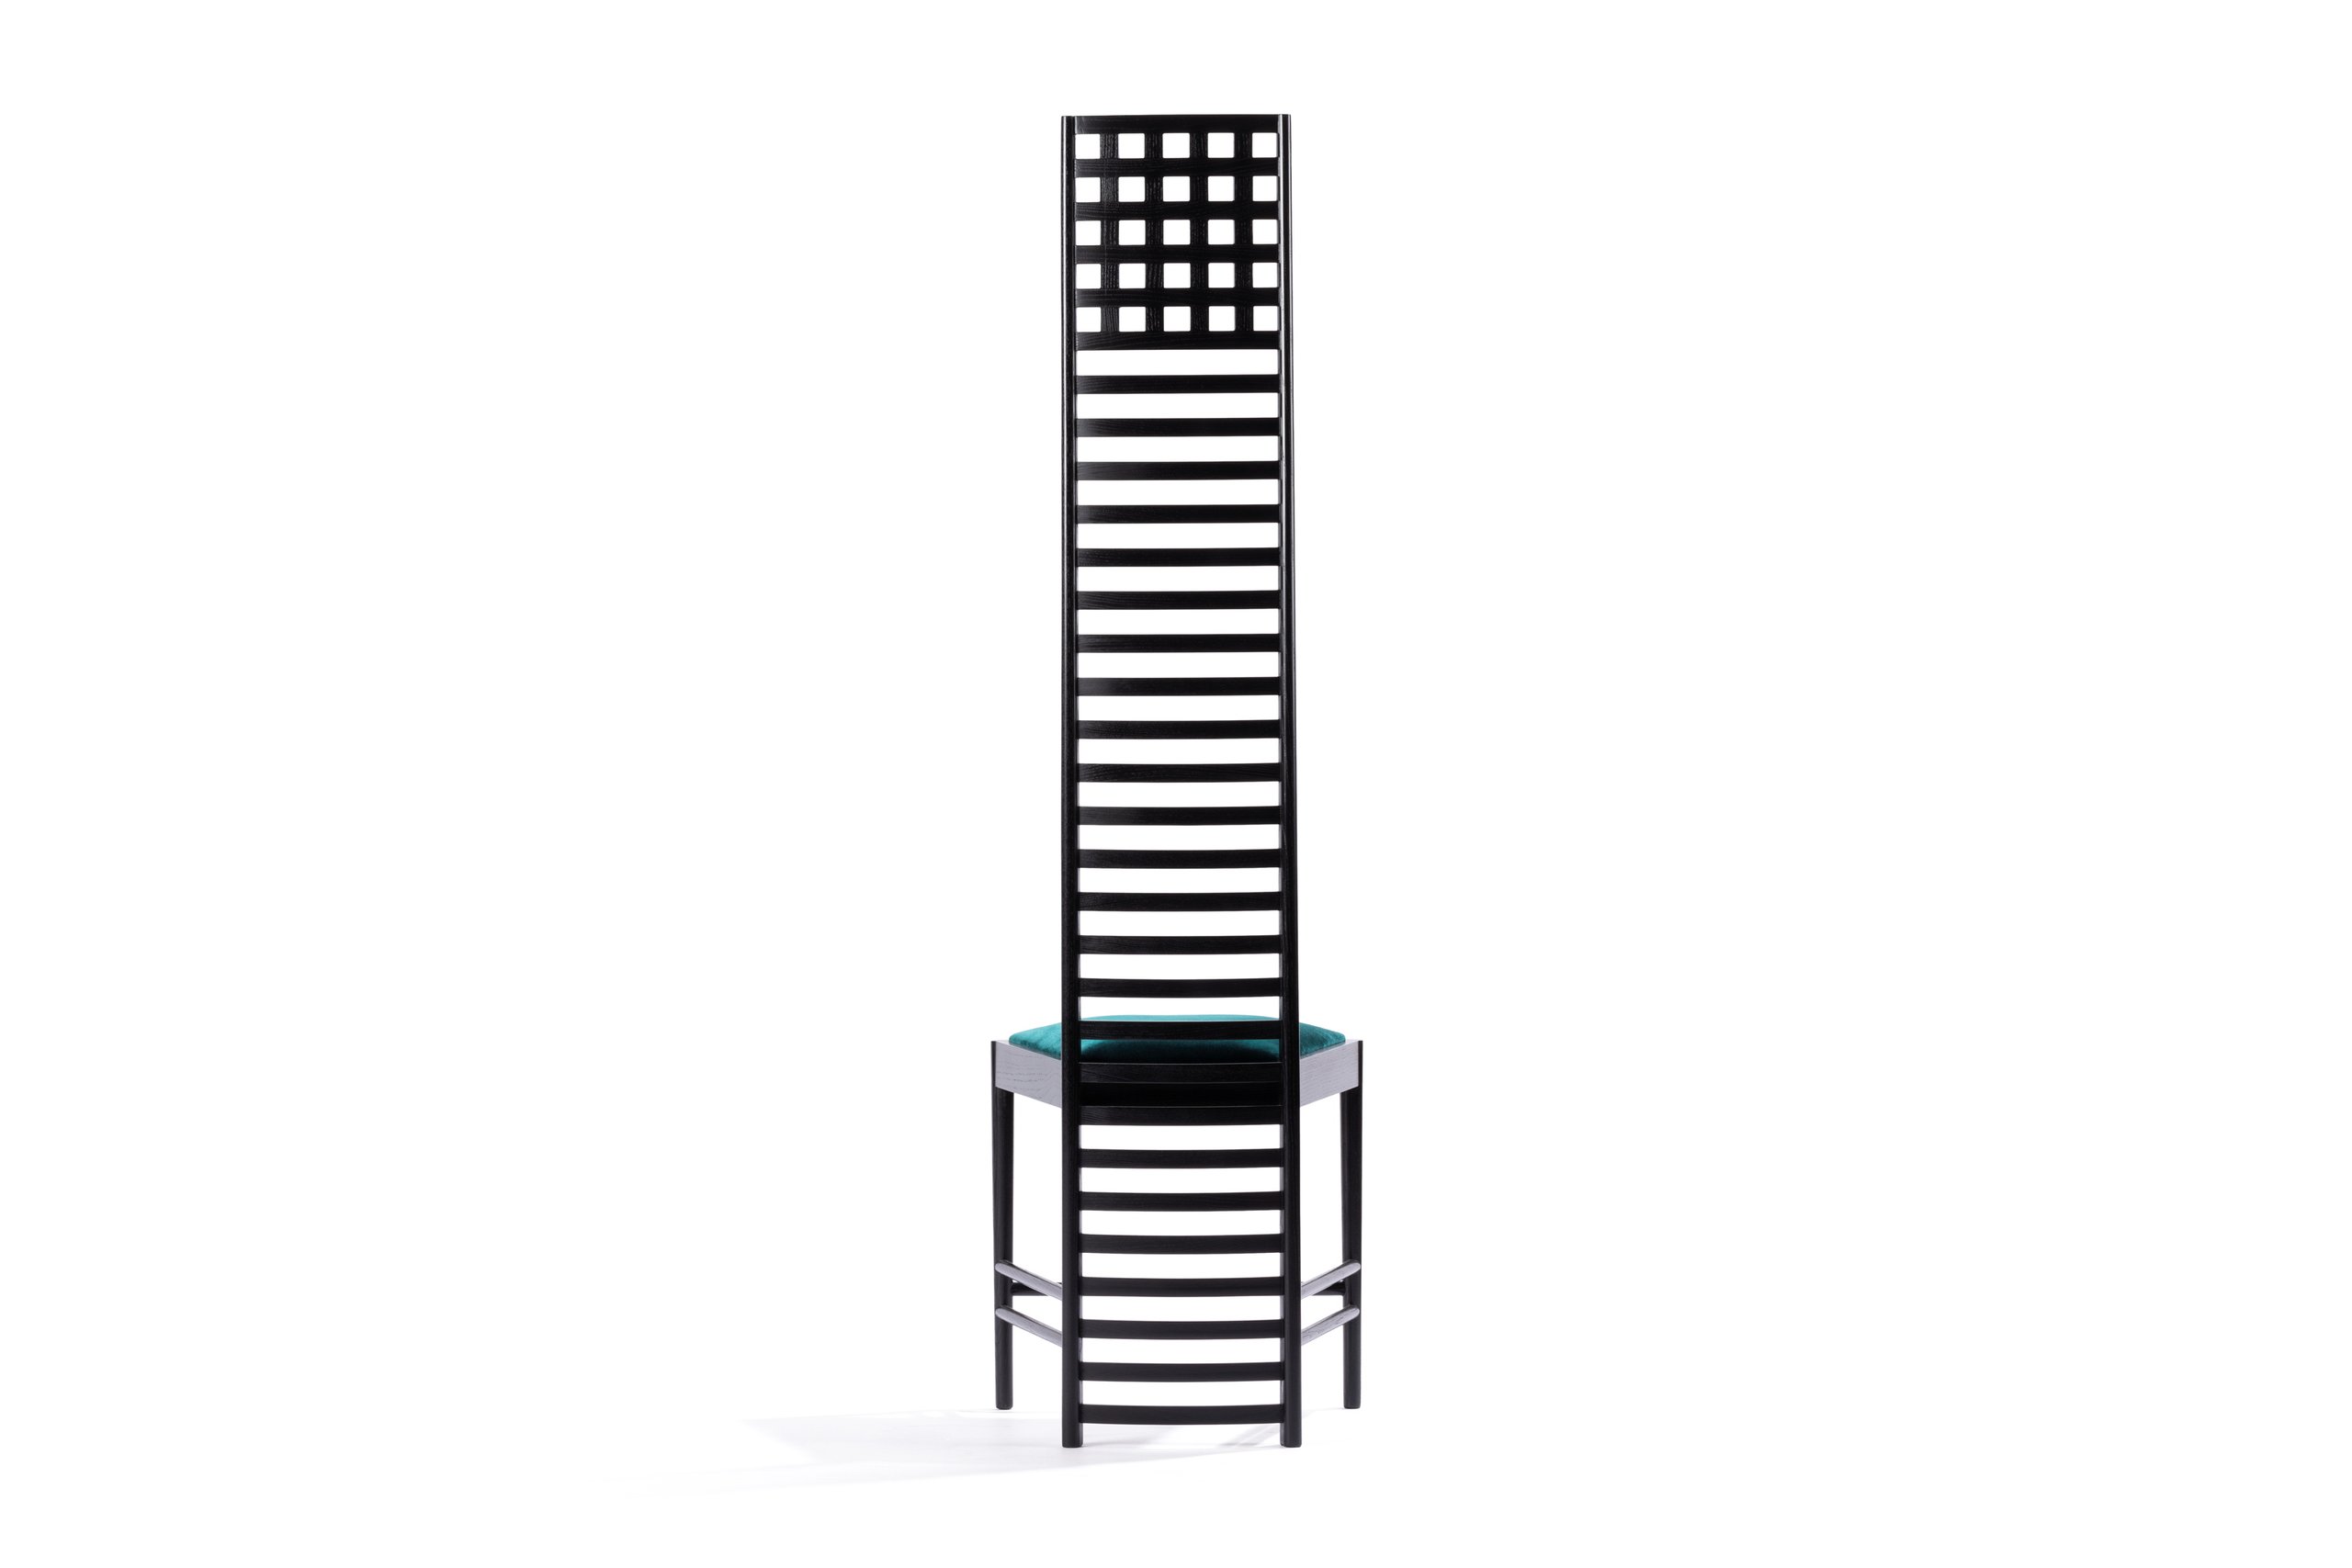 Hill House I chair, designed by Charles Rennie Mackintosh